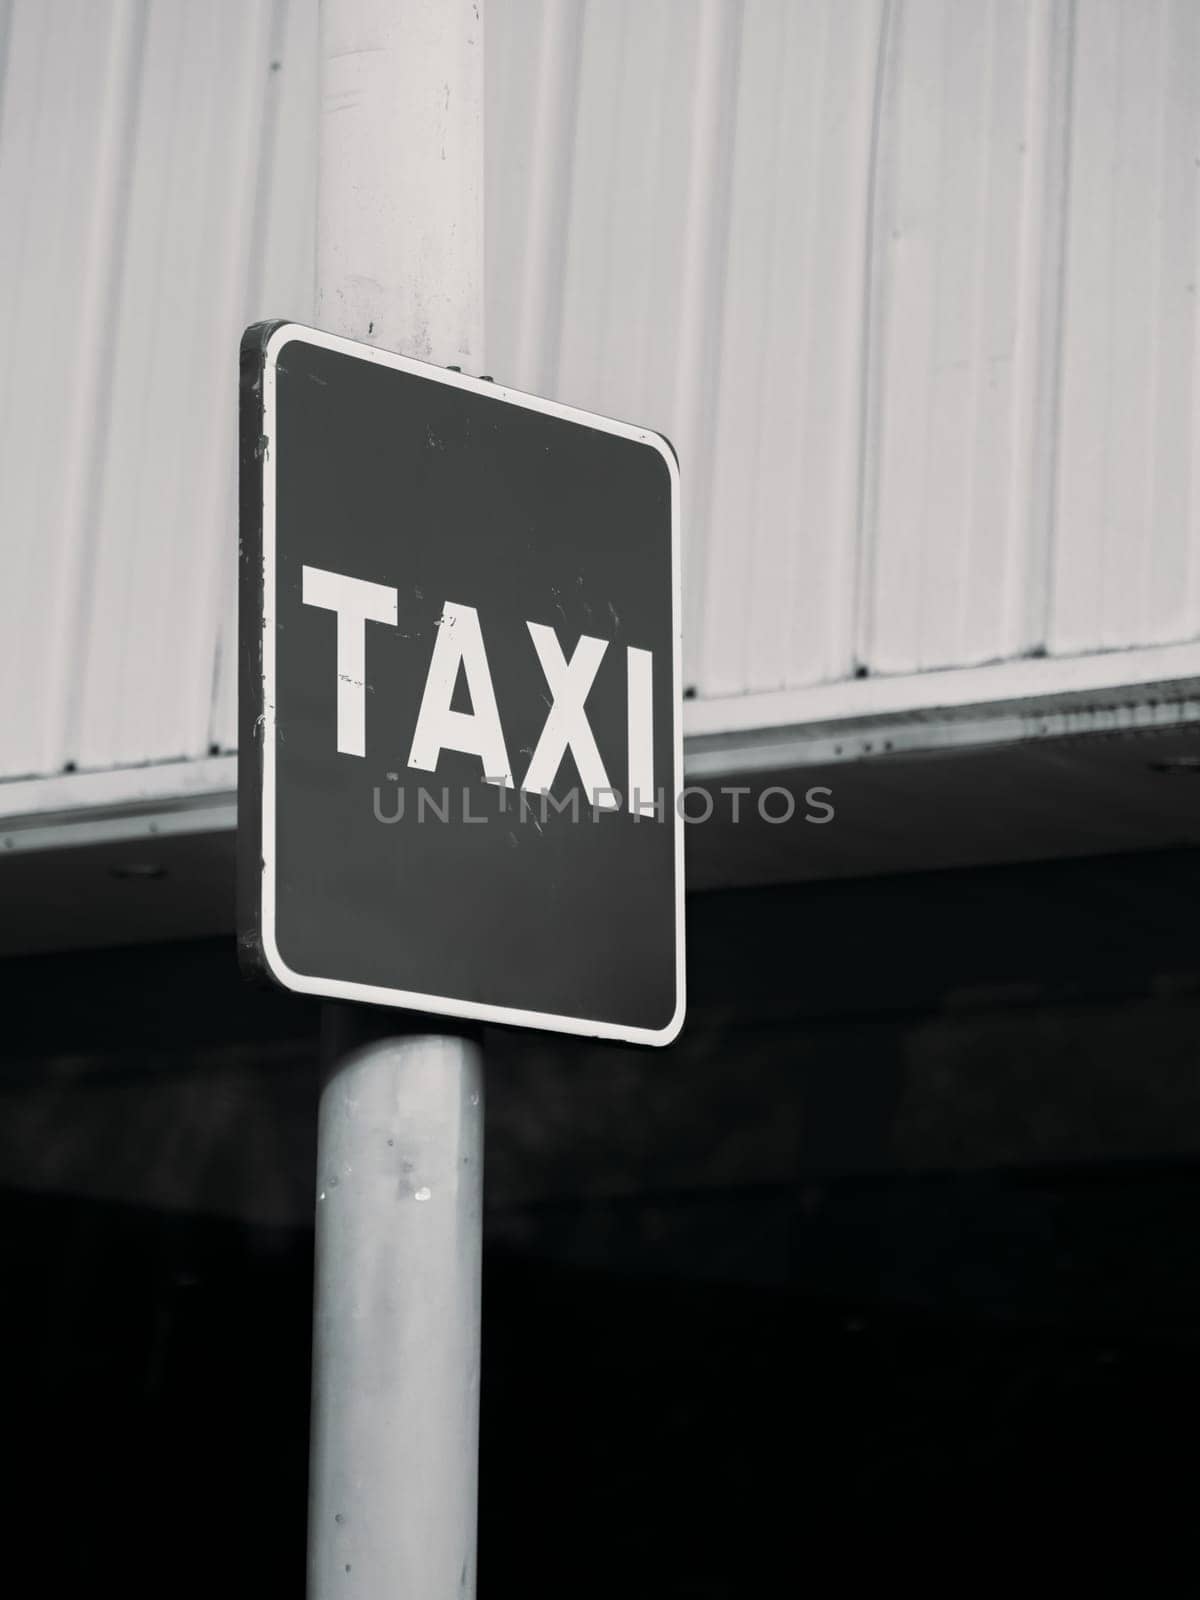 A black and white photo of a taxi sign affixed to a pole with an industrial metal backdrop